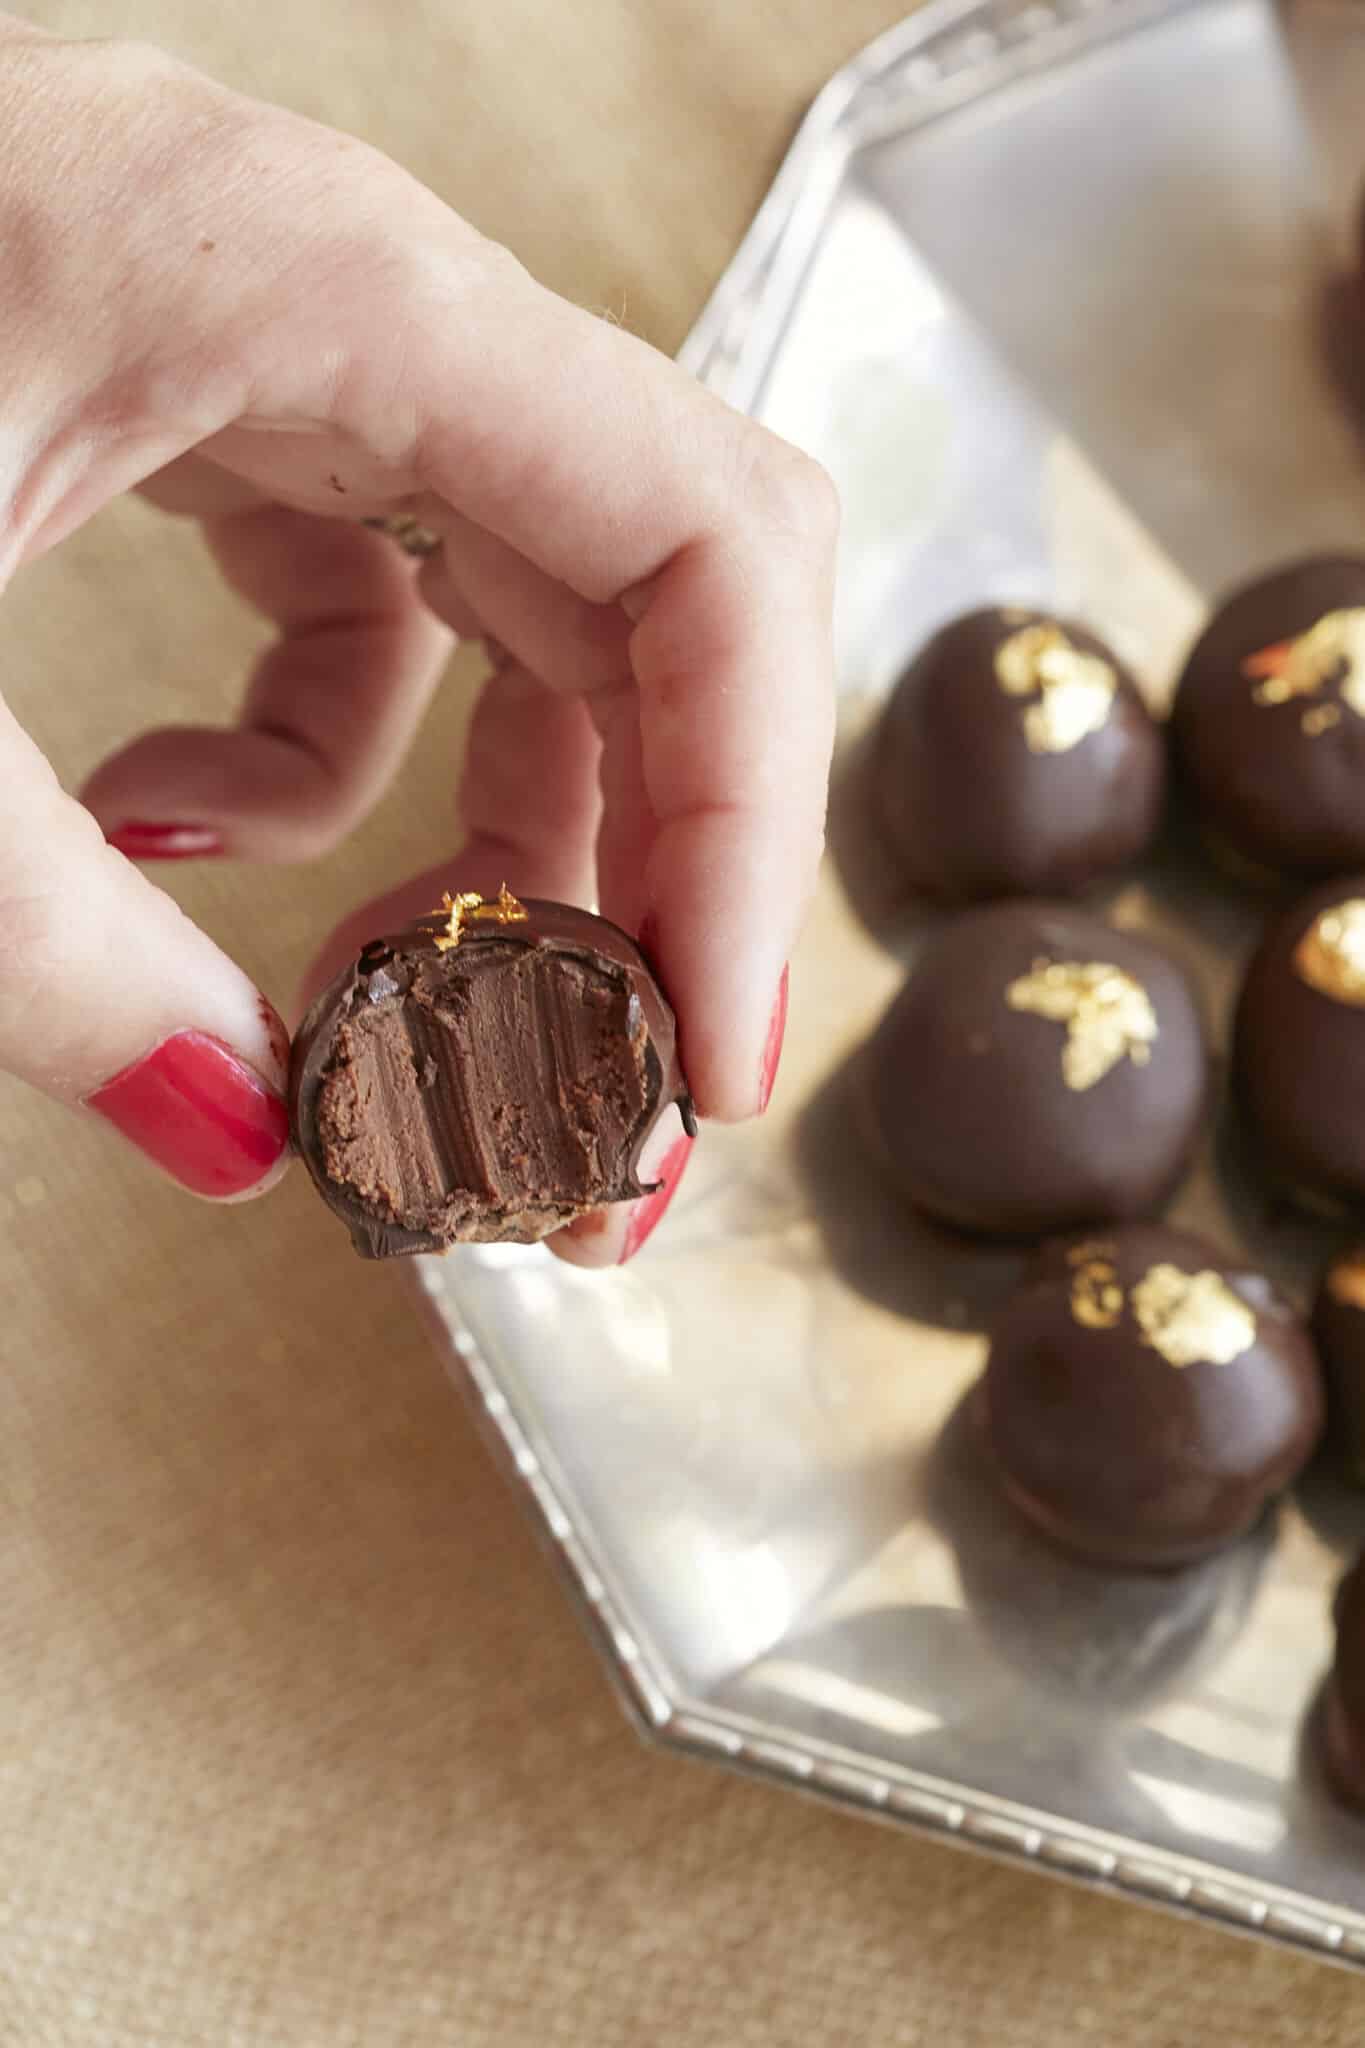 Heavenly Champagne Truffles are placed on a silver platter. They have bittersweet chocolate shells and are decorated with edible gold leaves. One truffle has been taken a bite and it shows the velvety smooth inside. 